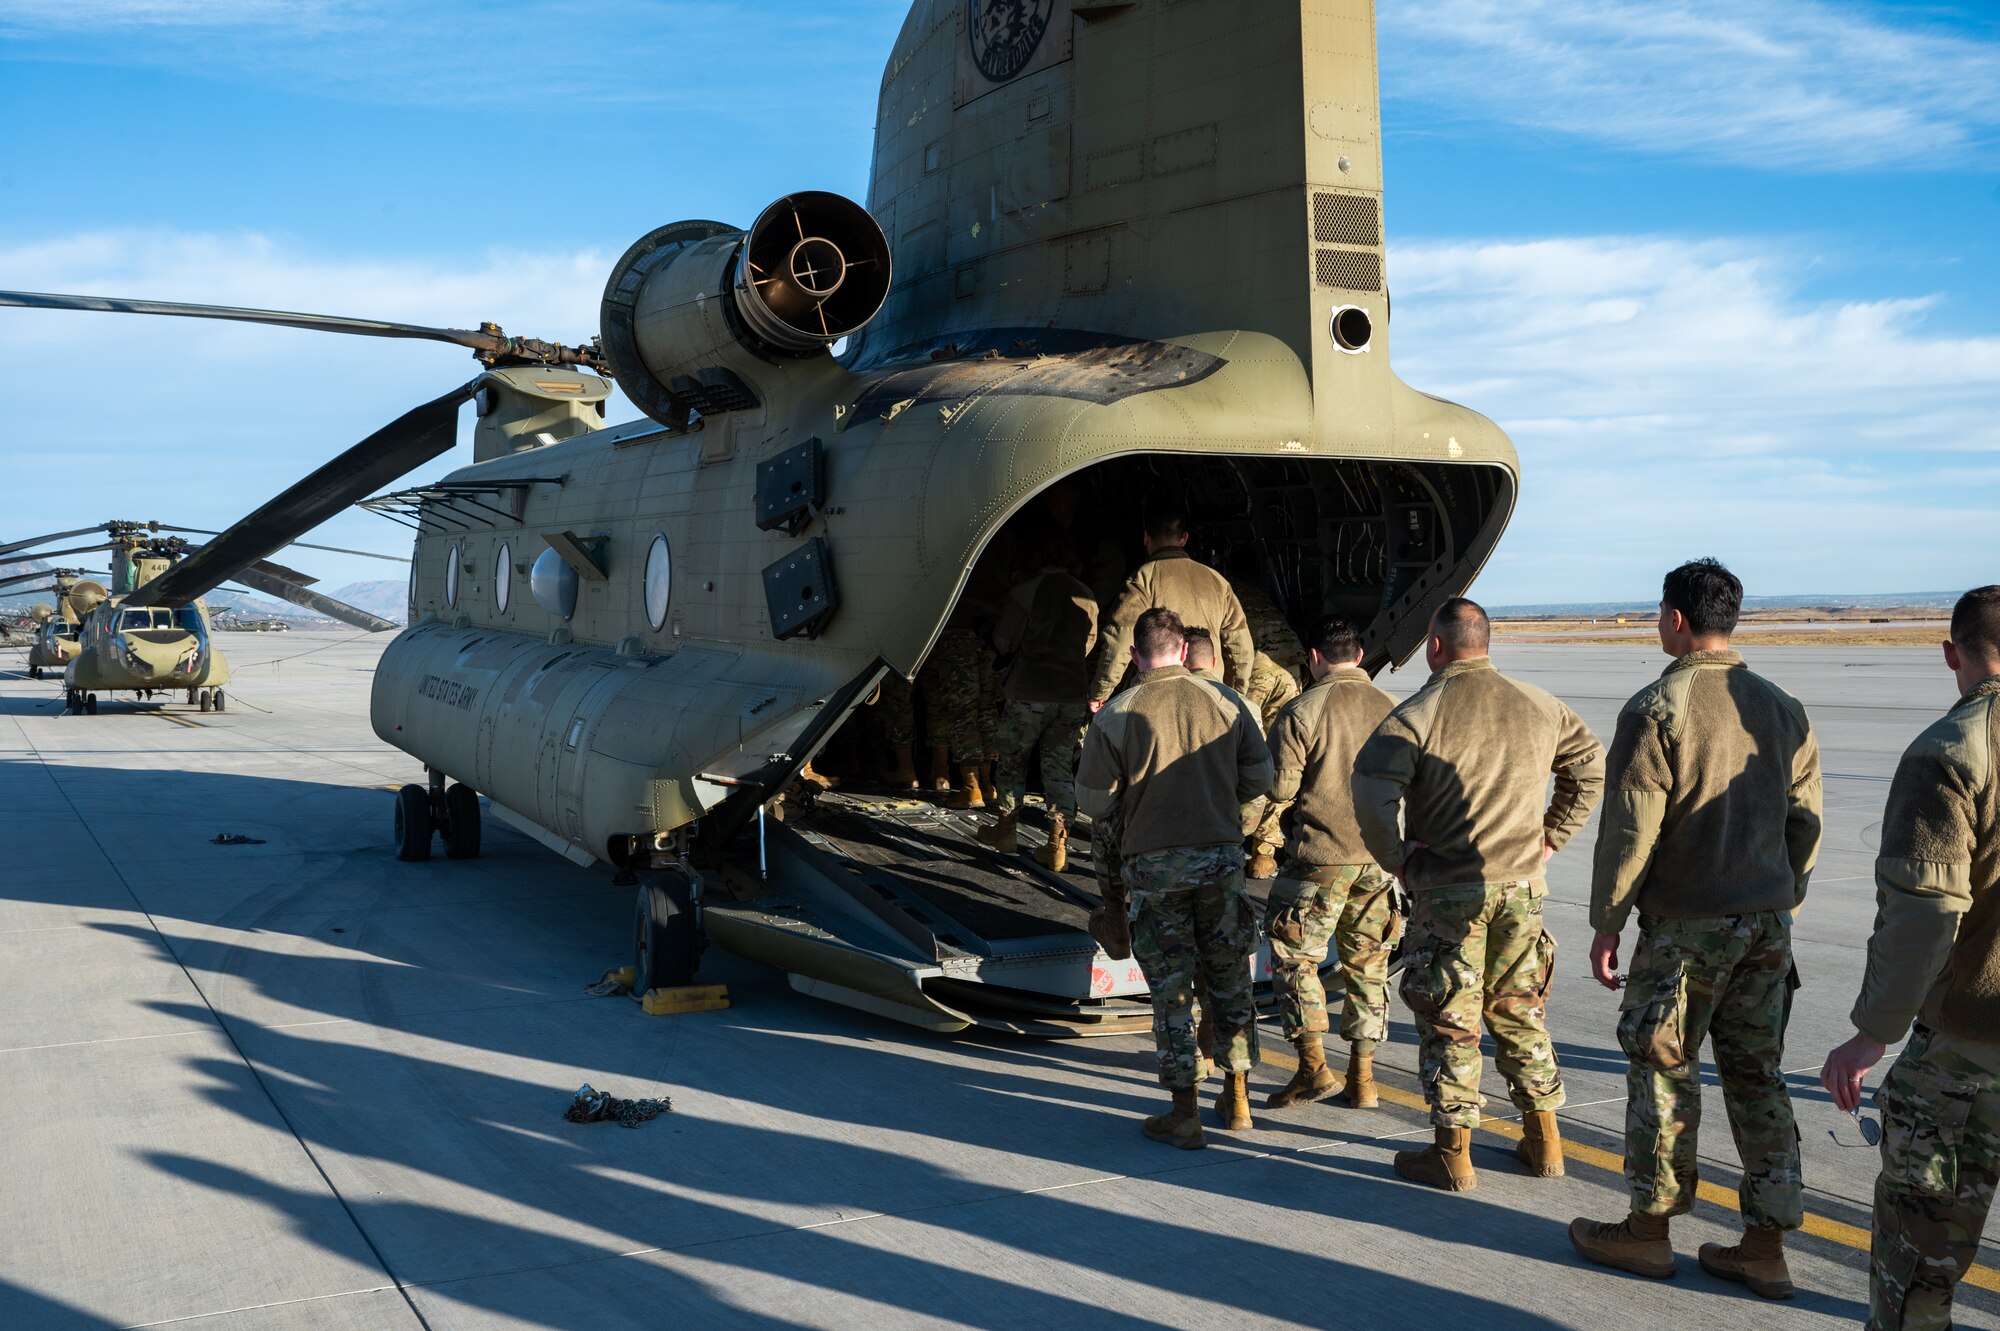 Guardians load onto a U.S. Army CH-47 Chinook for a partnership effort reenlistment flight.